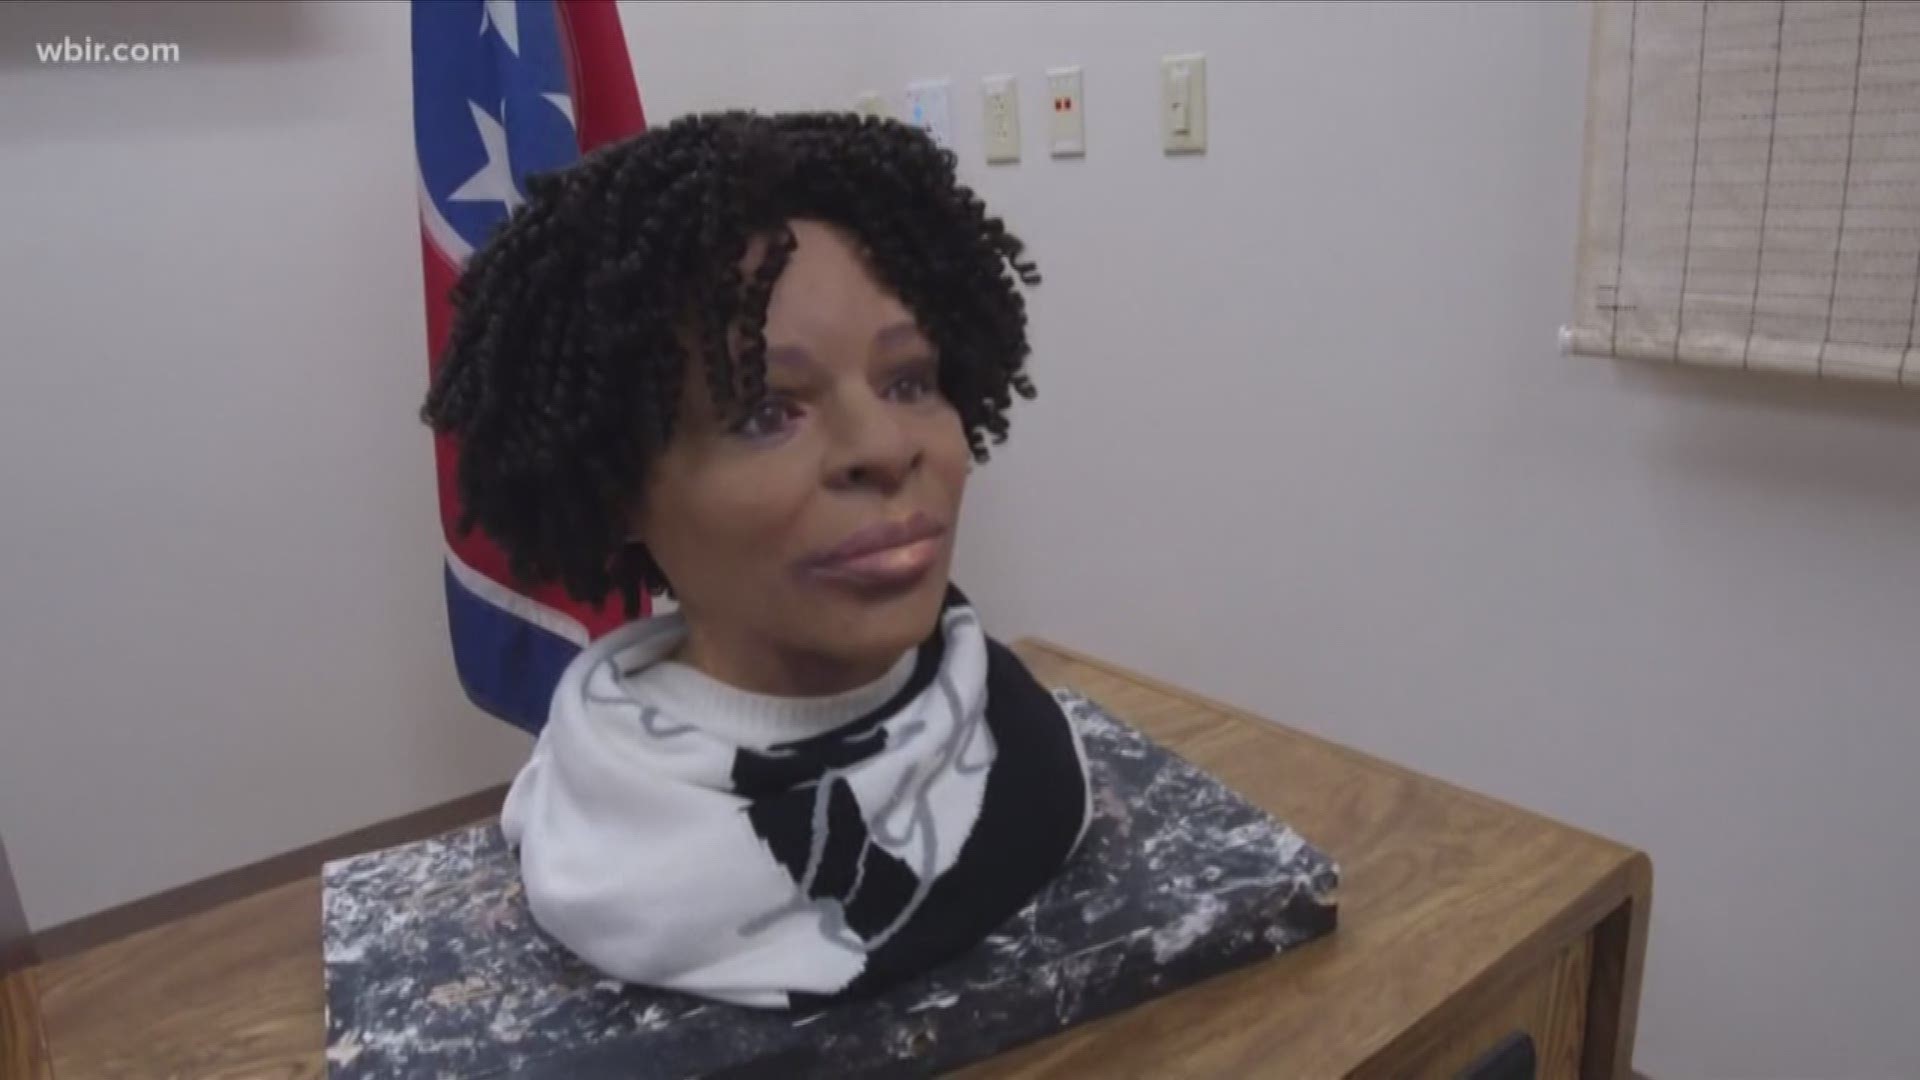 THE HAMILTON COUNTY COLD CASE UNIT and THE GEORGIA BUREAU OF INVESTIGATION ARE ASKING FOR THE PUBLIC'S HELP IDENTIFYING THE WOMAN.